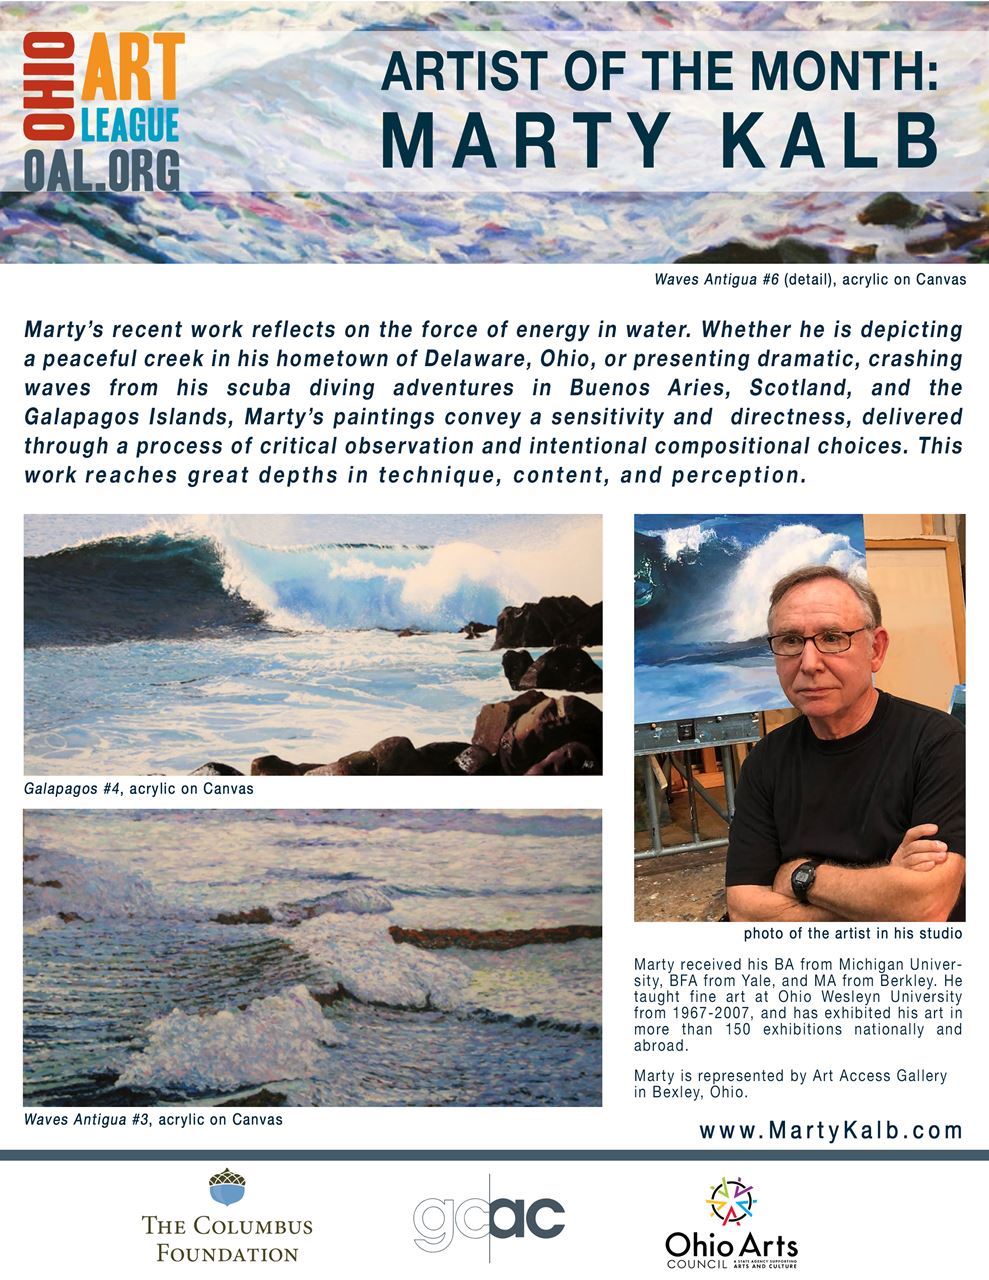 Aritst of the month: Marty Kalb. Marty's recent work reflects on the force of energy in water.  Whether he is depicting a peaceful creek in his hometown of Delaware, Ohio, or presenting dramatic, crashing waves from his scuba diving adventures in buenos Aires, Scotland, and the Galapagos Islands, Marty's paintings convey a sensitivity and directness, delivered through a process of critical observation and intentional compositional choices. This work reaches great depths in technique, content, and perception. "Marty received his BA from Michigan Uinversity, BFA from Yale, and MA from Berkley.  He taught fine art at OHio Wesleyn University from 1967-2007, and has exhibited  his art in more than 150 exhibitions nationally and abroad. Marty is represented by Art Access Gallery in Bexley, Ohio."